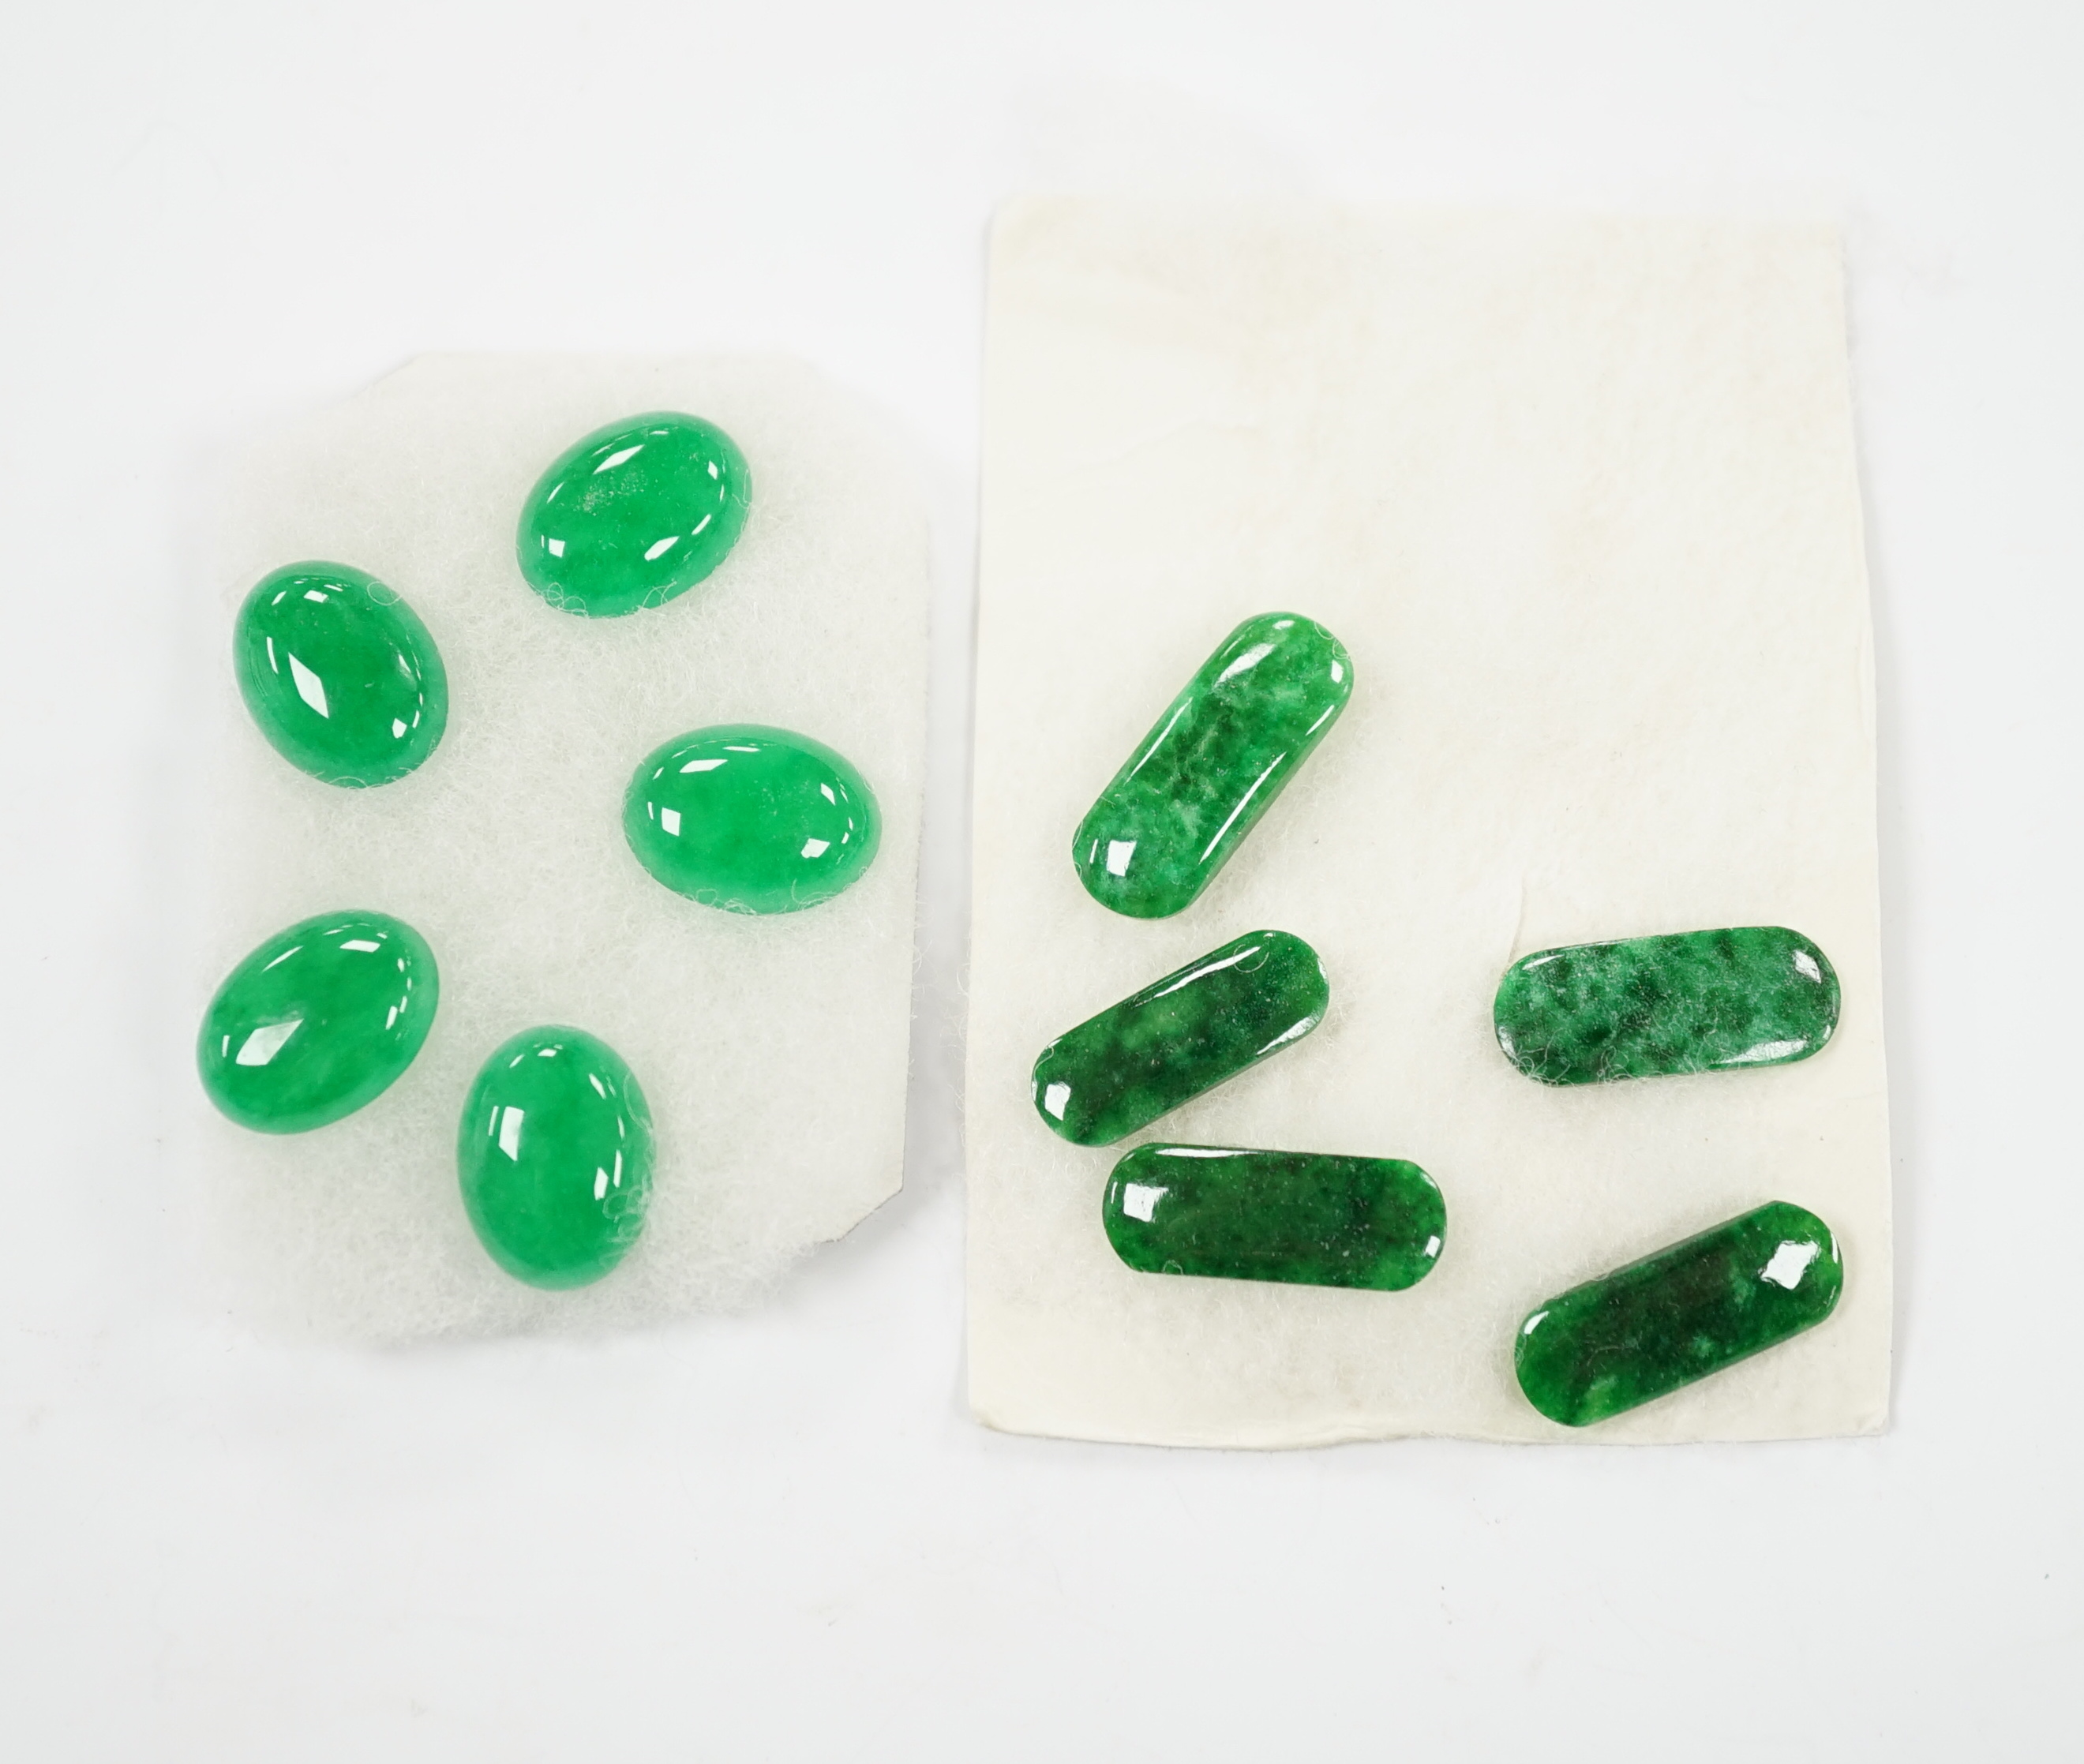 Five unmounted jadeite cabochons, approx. 15mm and five unmounted ovoid jadeite cabochons, approx. 22mm, (fixed to a card background).